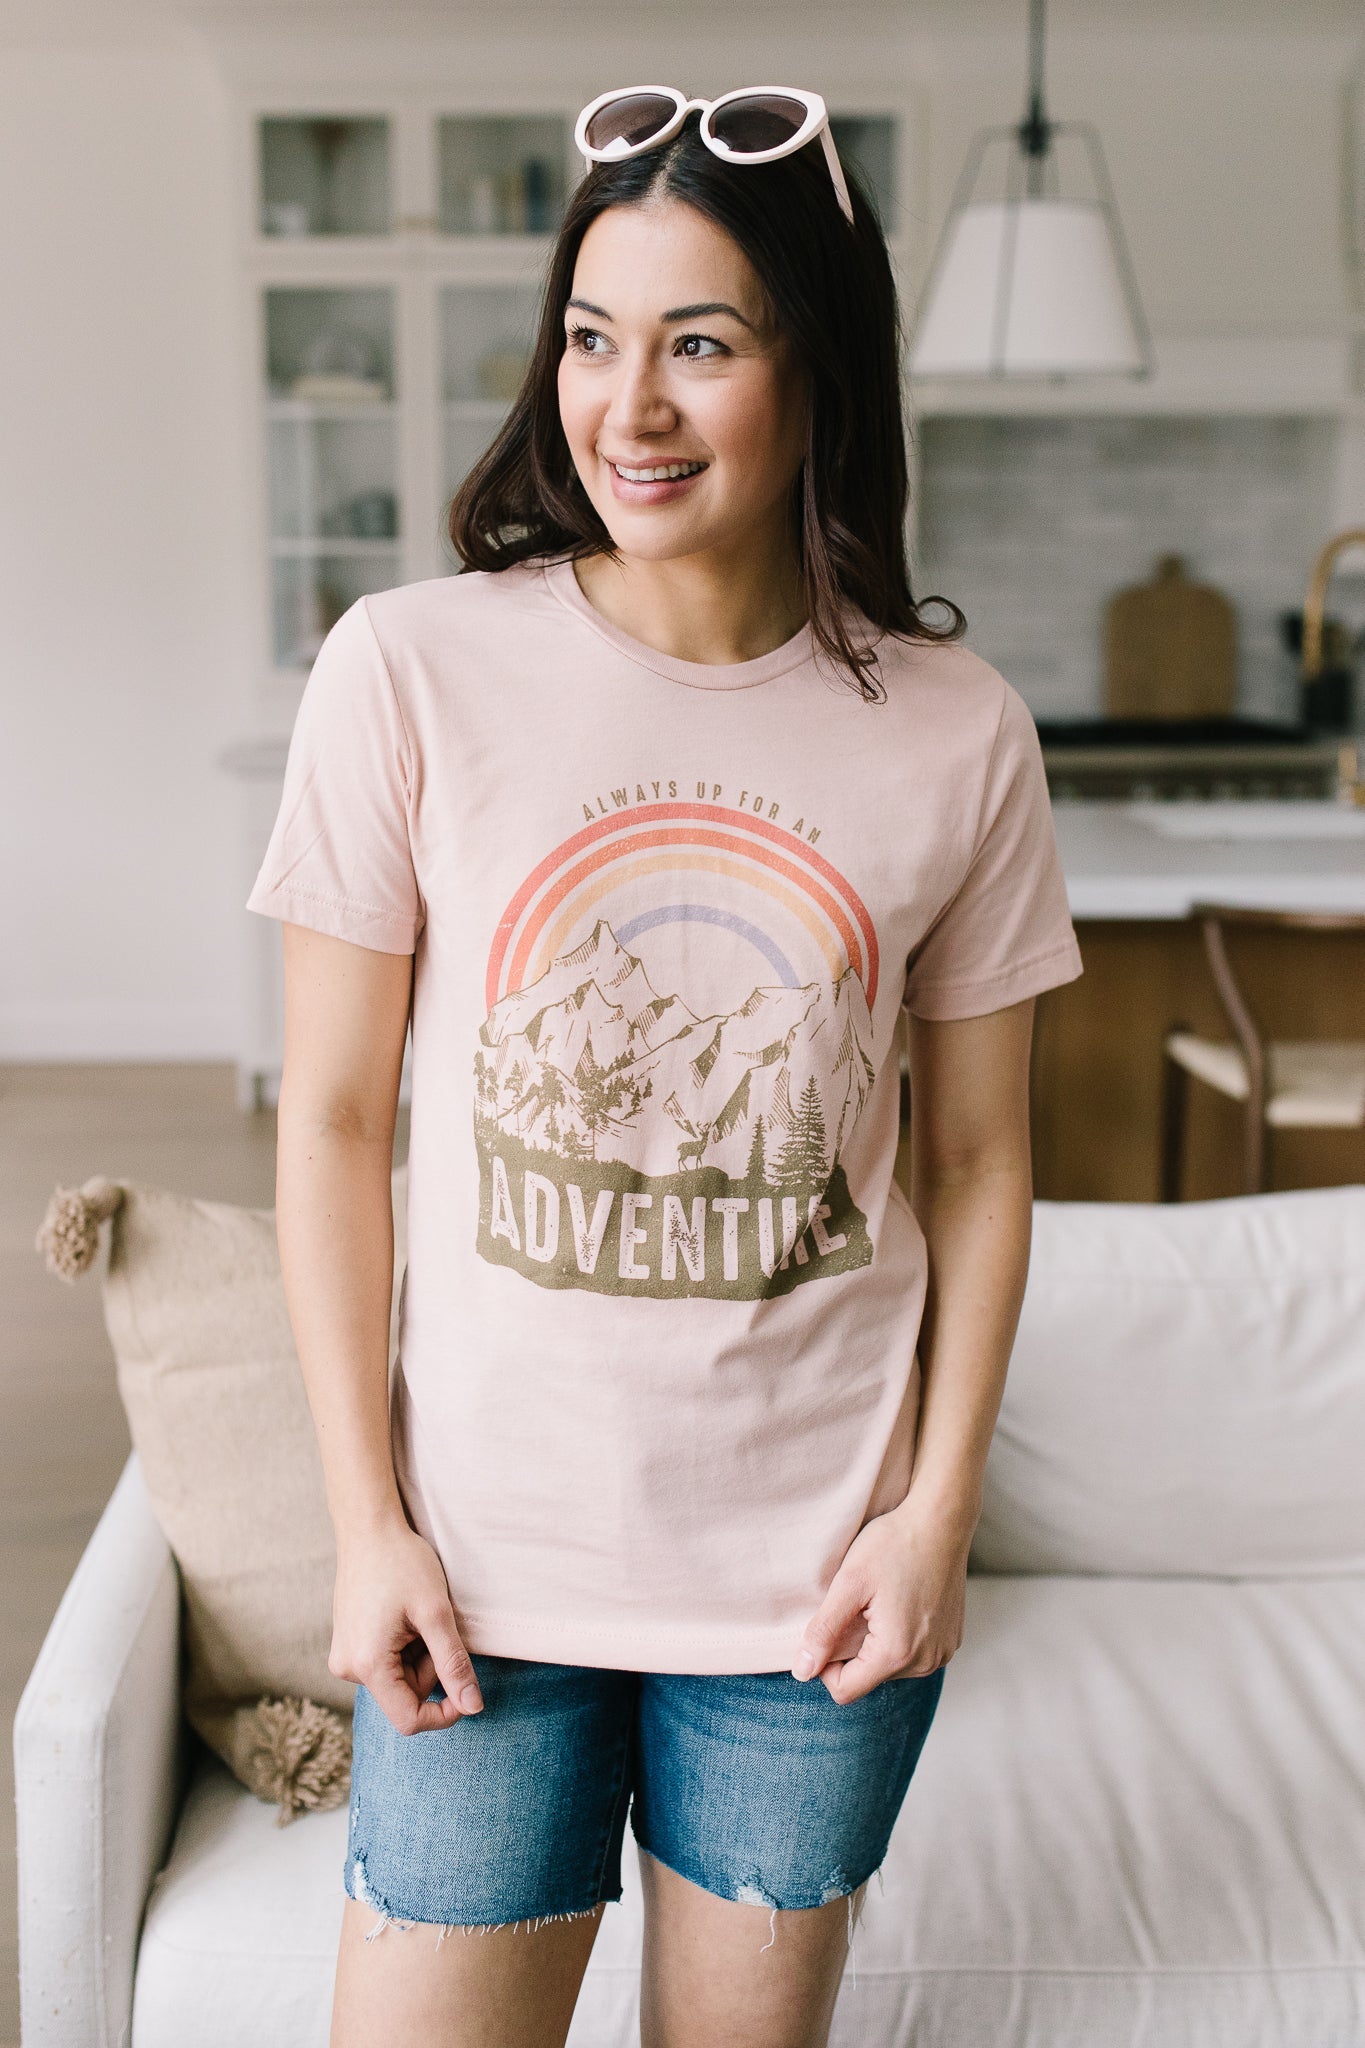 Up For An Adventure Tee (Online Exclusive)